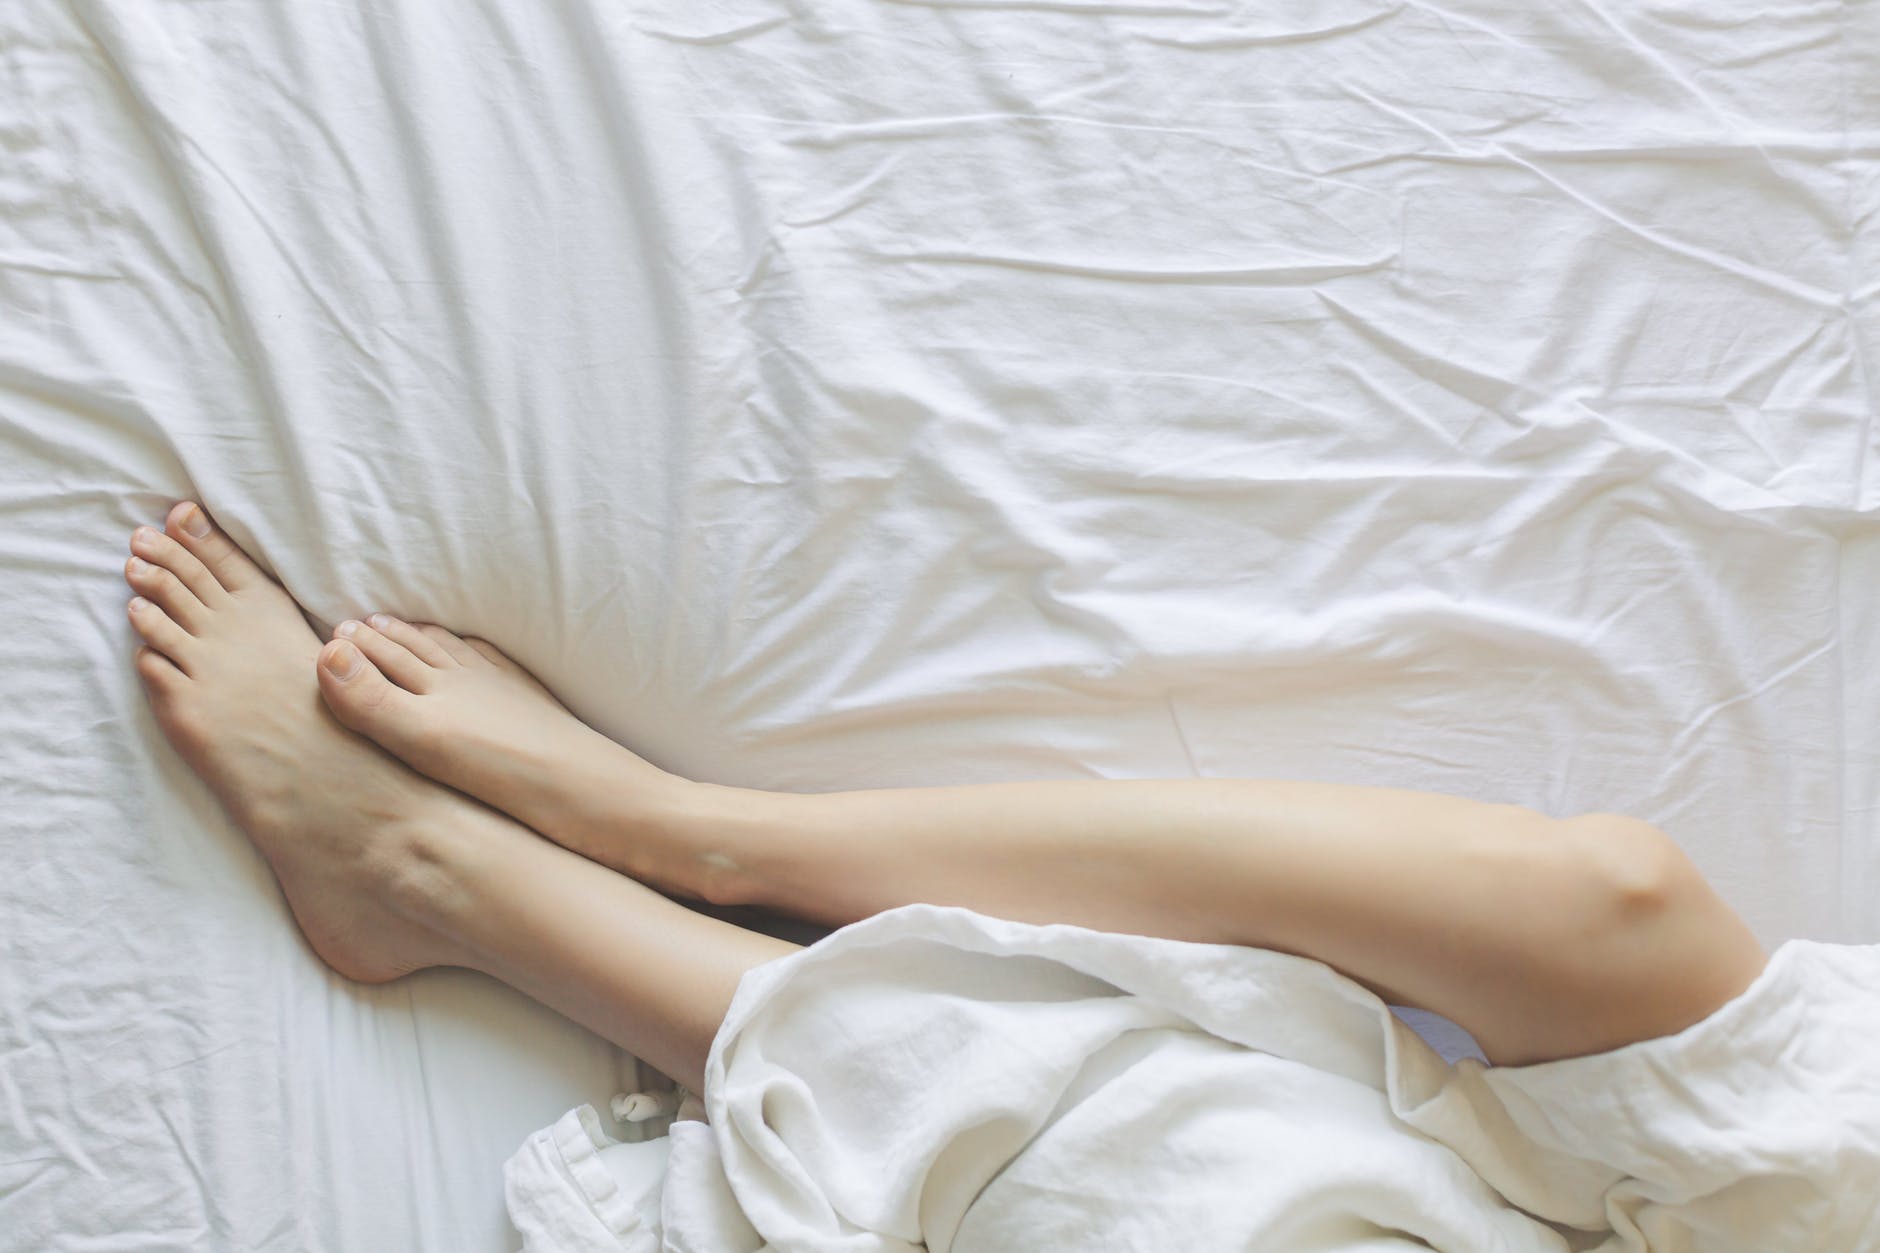 legs of a woman lying in bed and covered with a blanket